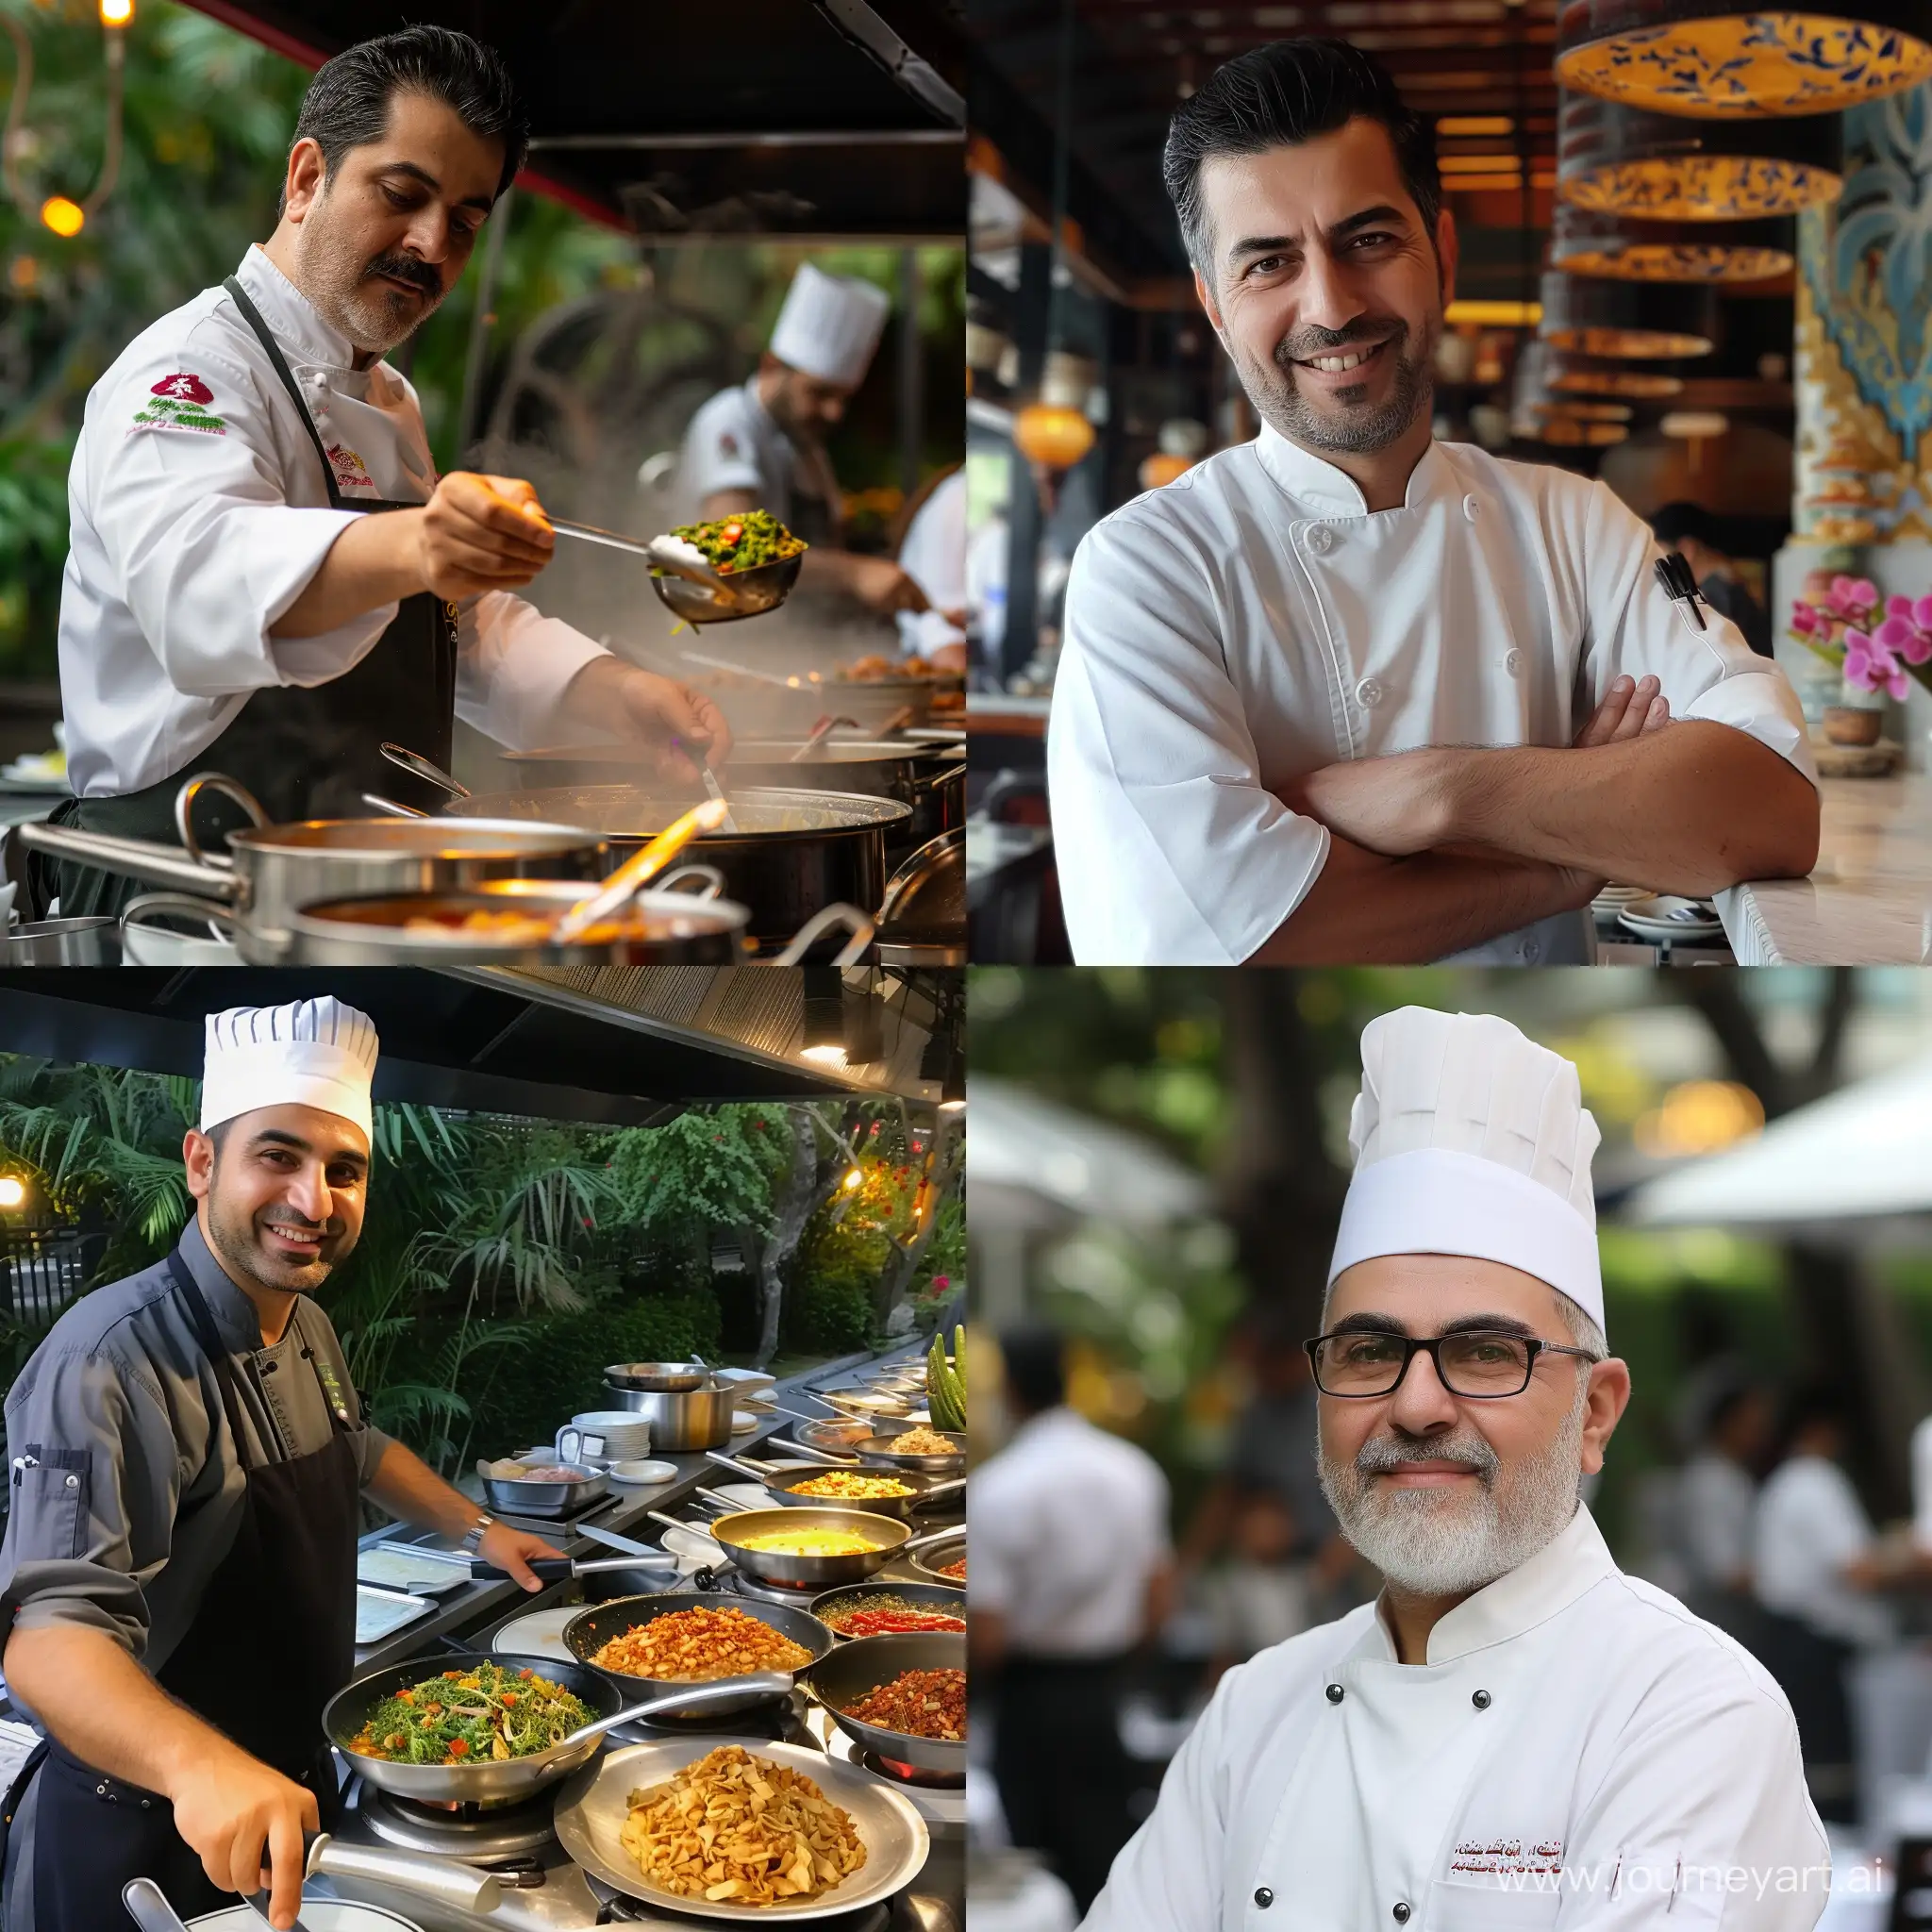 Iranian-Chefs-Cooking-Thai-Cuisine-Together